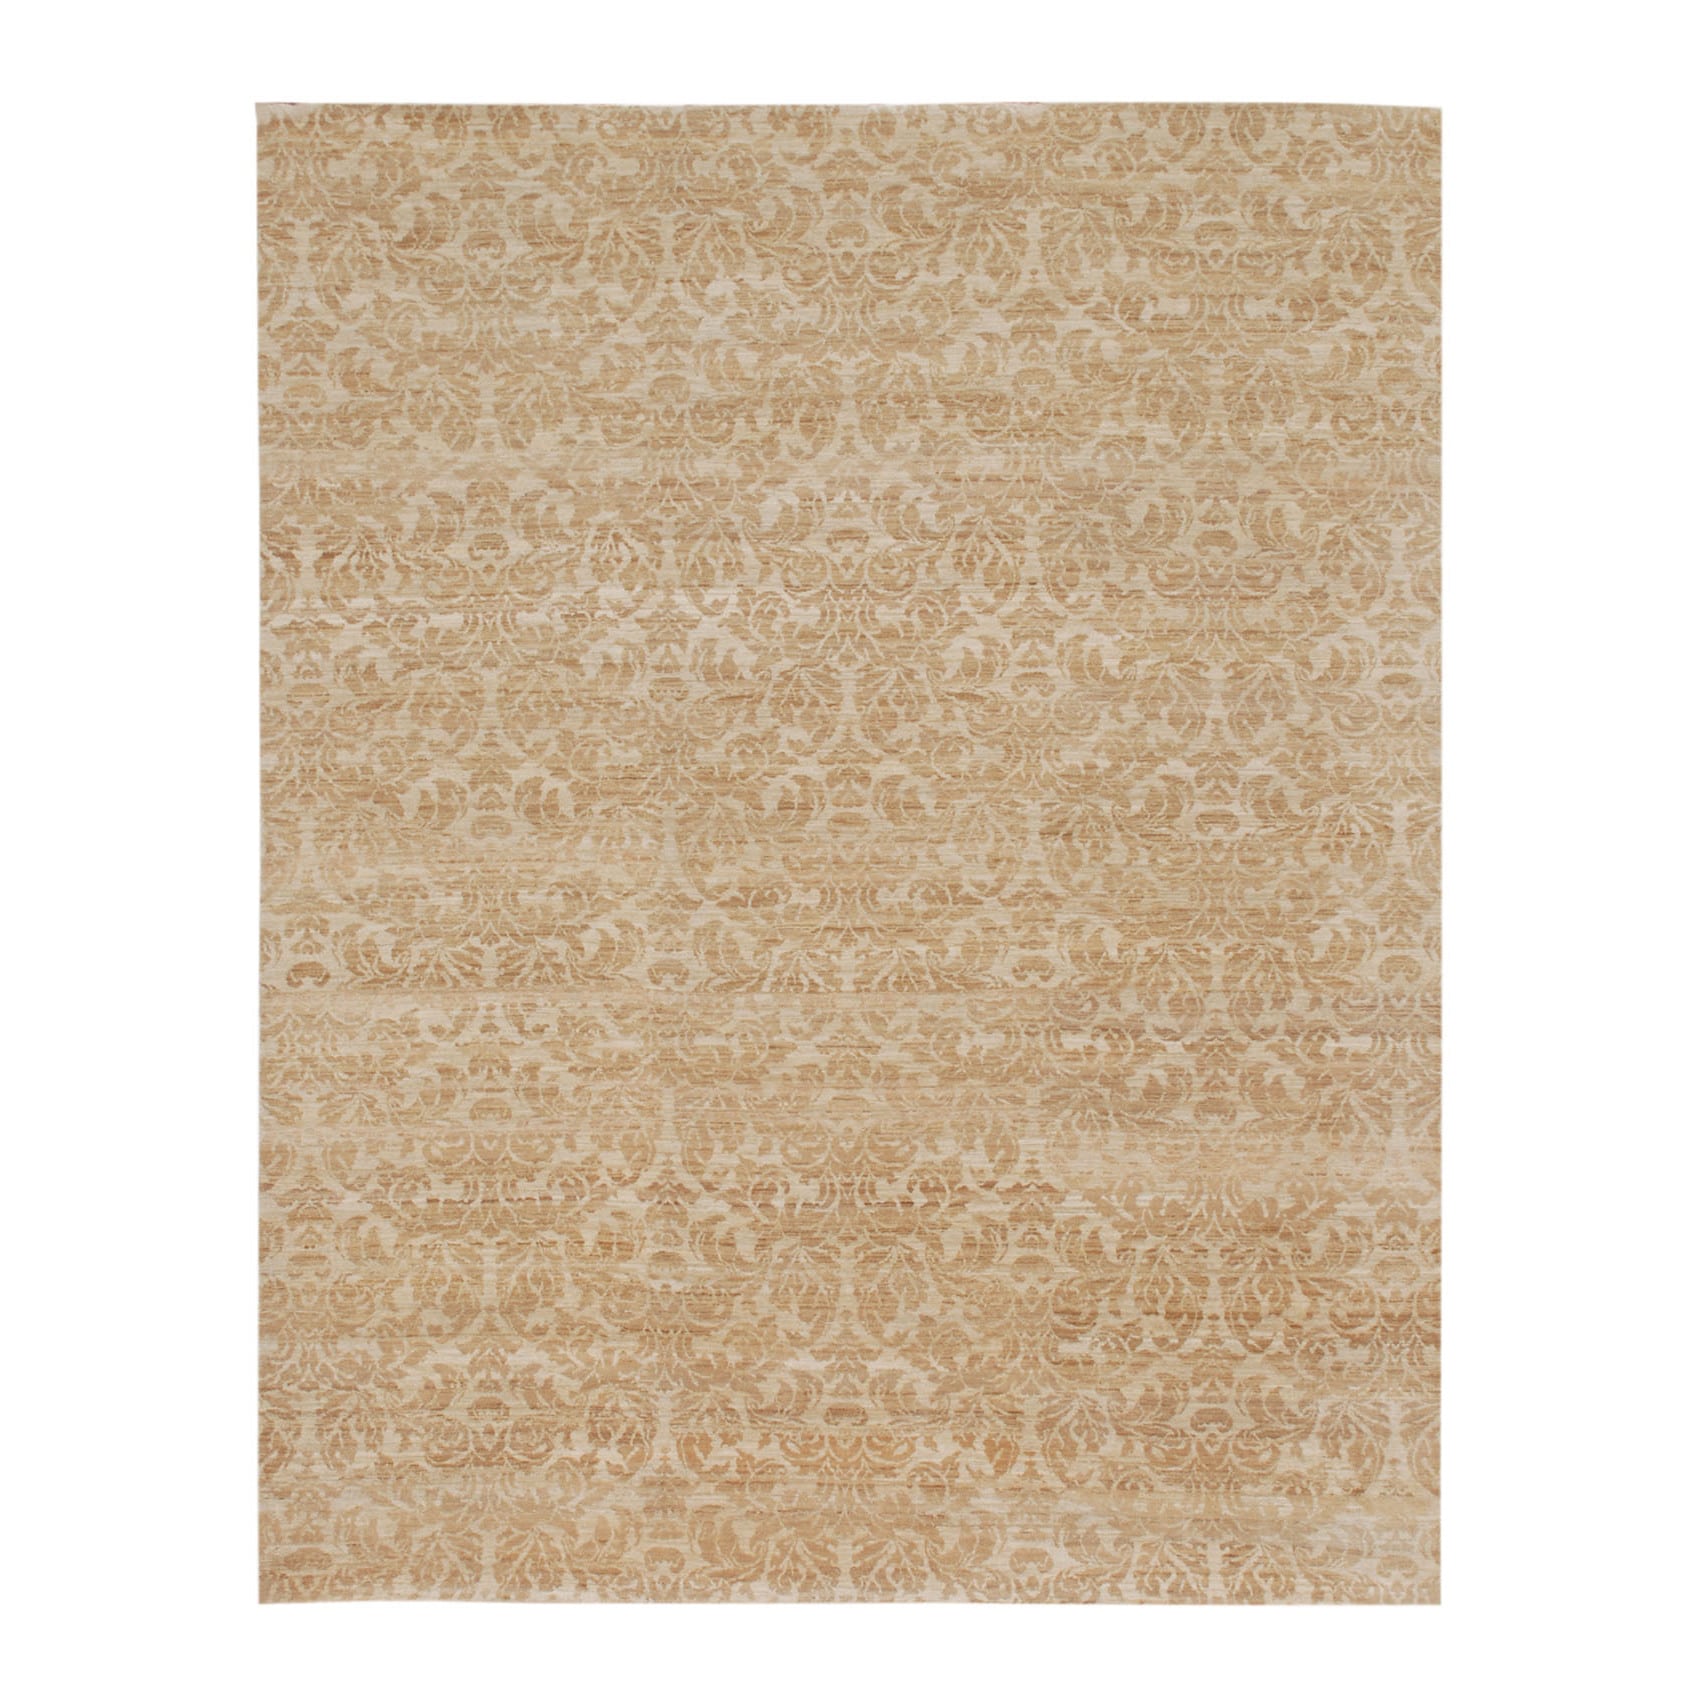 Hand knotted Ivory Oriental Pattern Wool Rug (6 X 9)